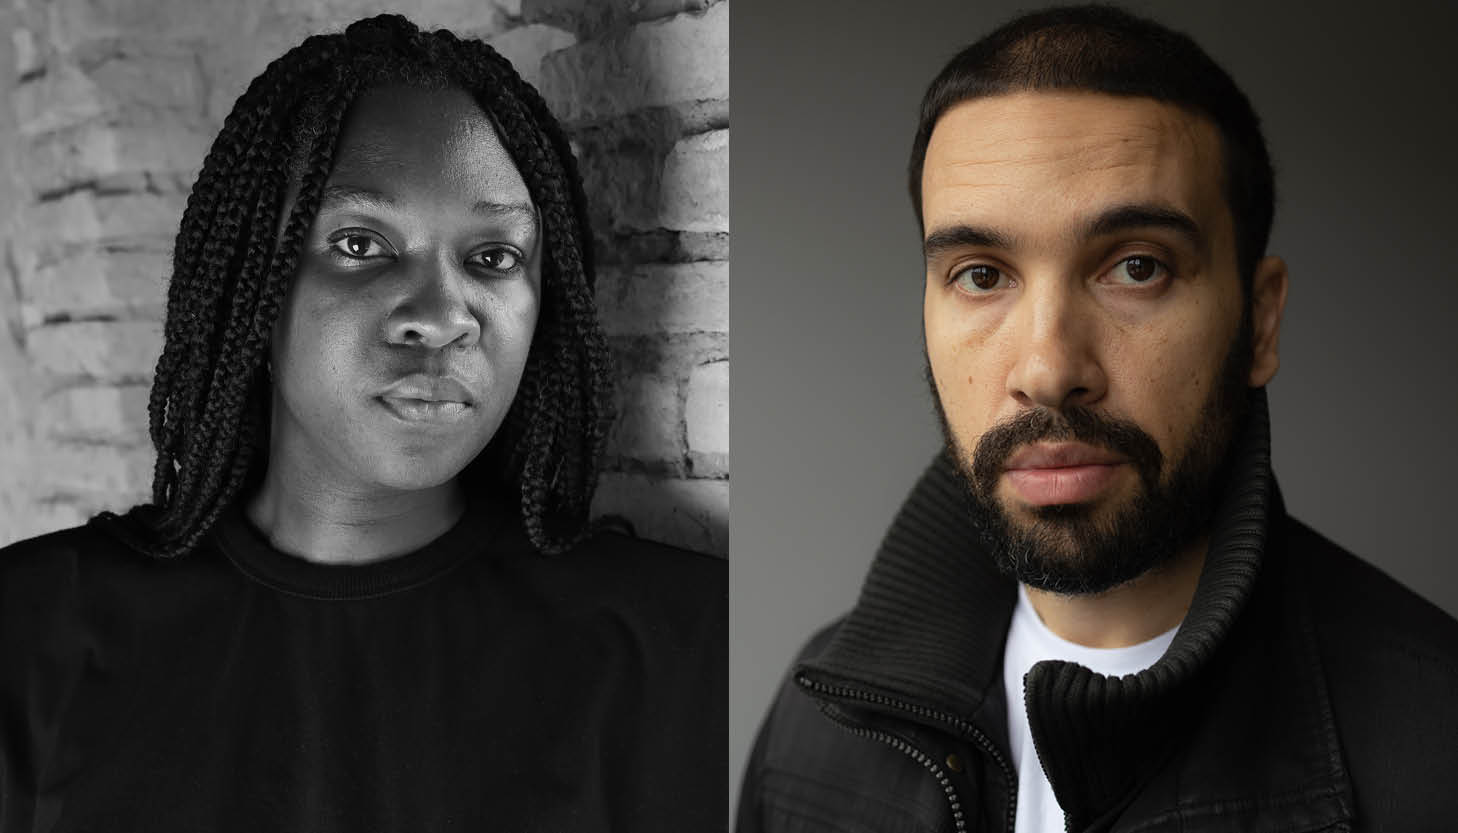 A black-and-white headshot of Black poet Canisia Lubrin on the left and a headshot of Black poet Marcus Jackson on the right.